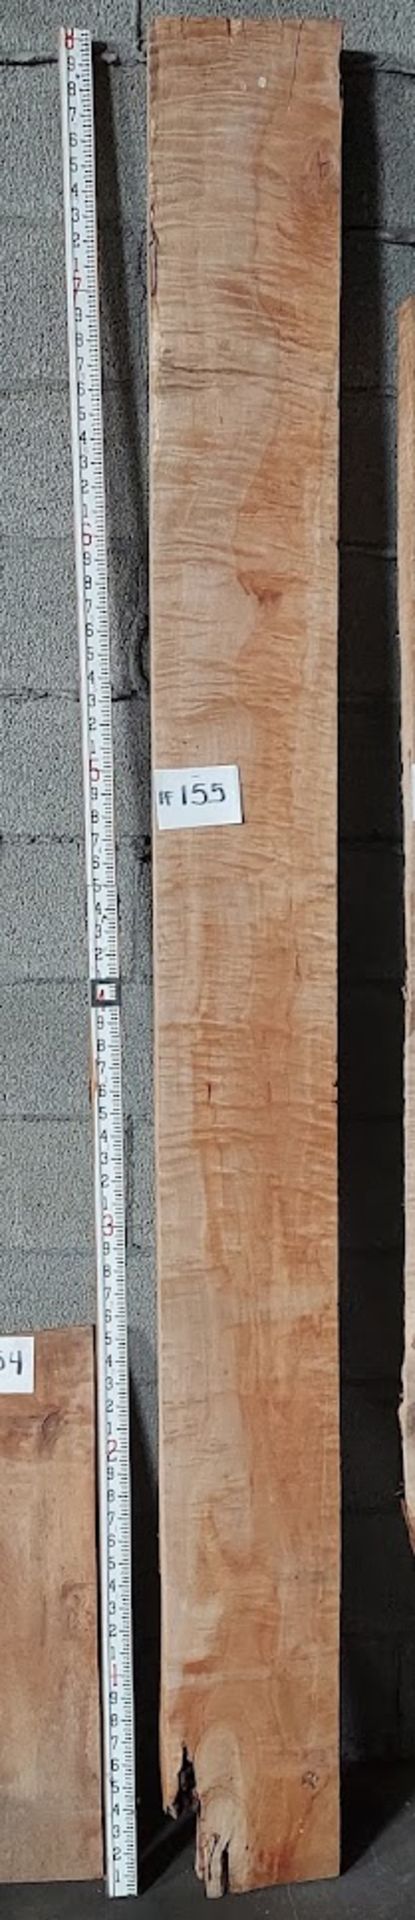 Maple Hardwood Lumber Slab, Size is approx. 96" x 9-1/2" x 2-5/8" Thick, Curly